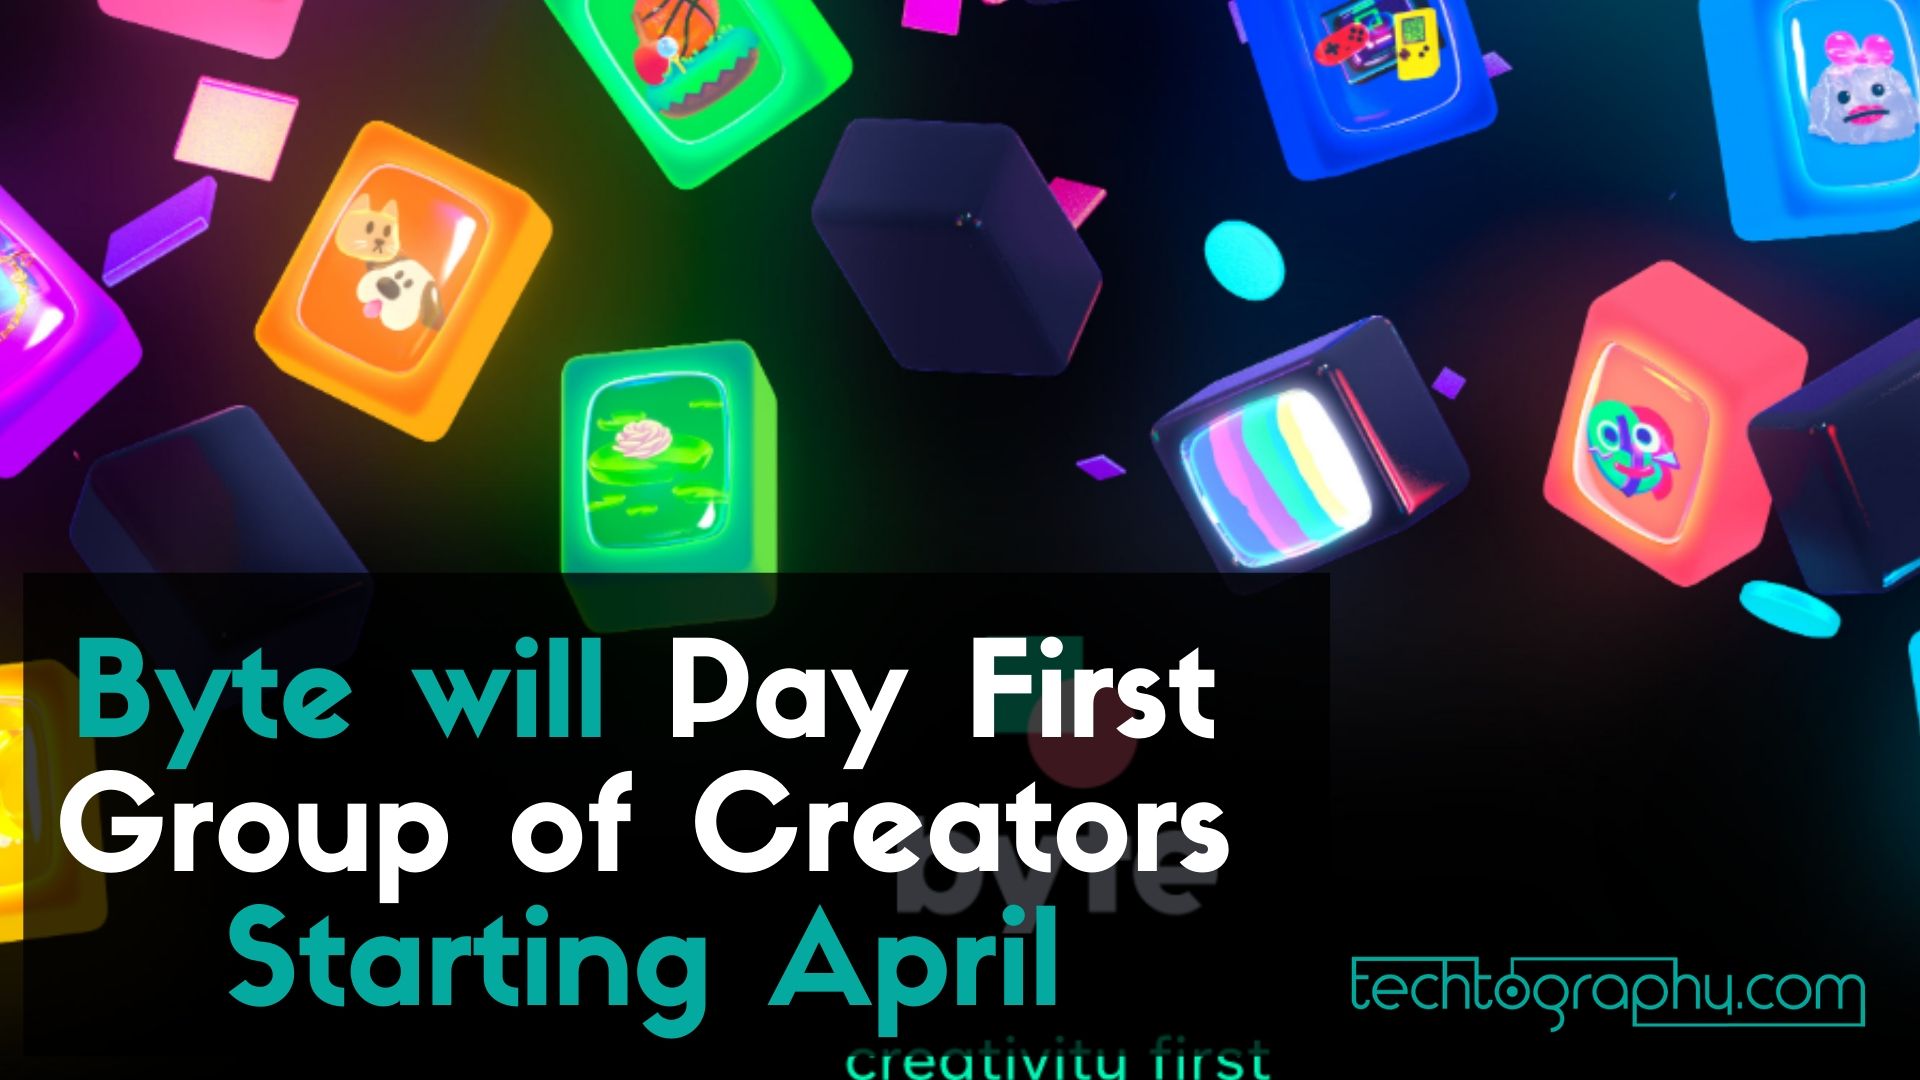 Byte will Pay First Group of Creators Starting April